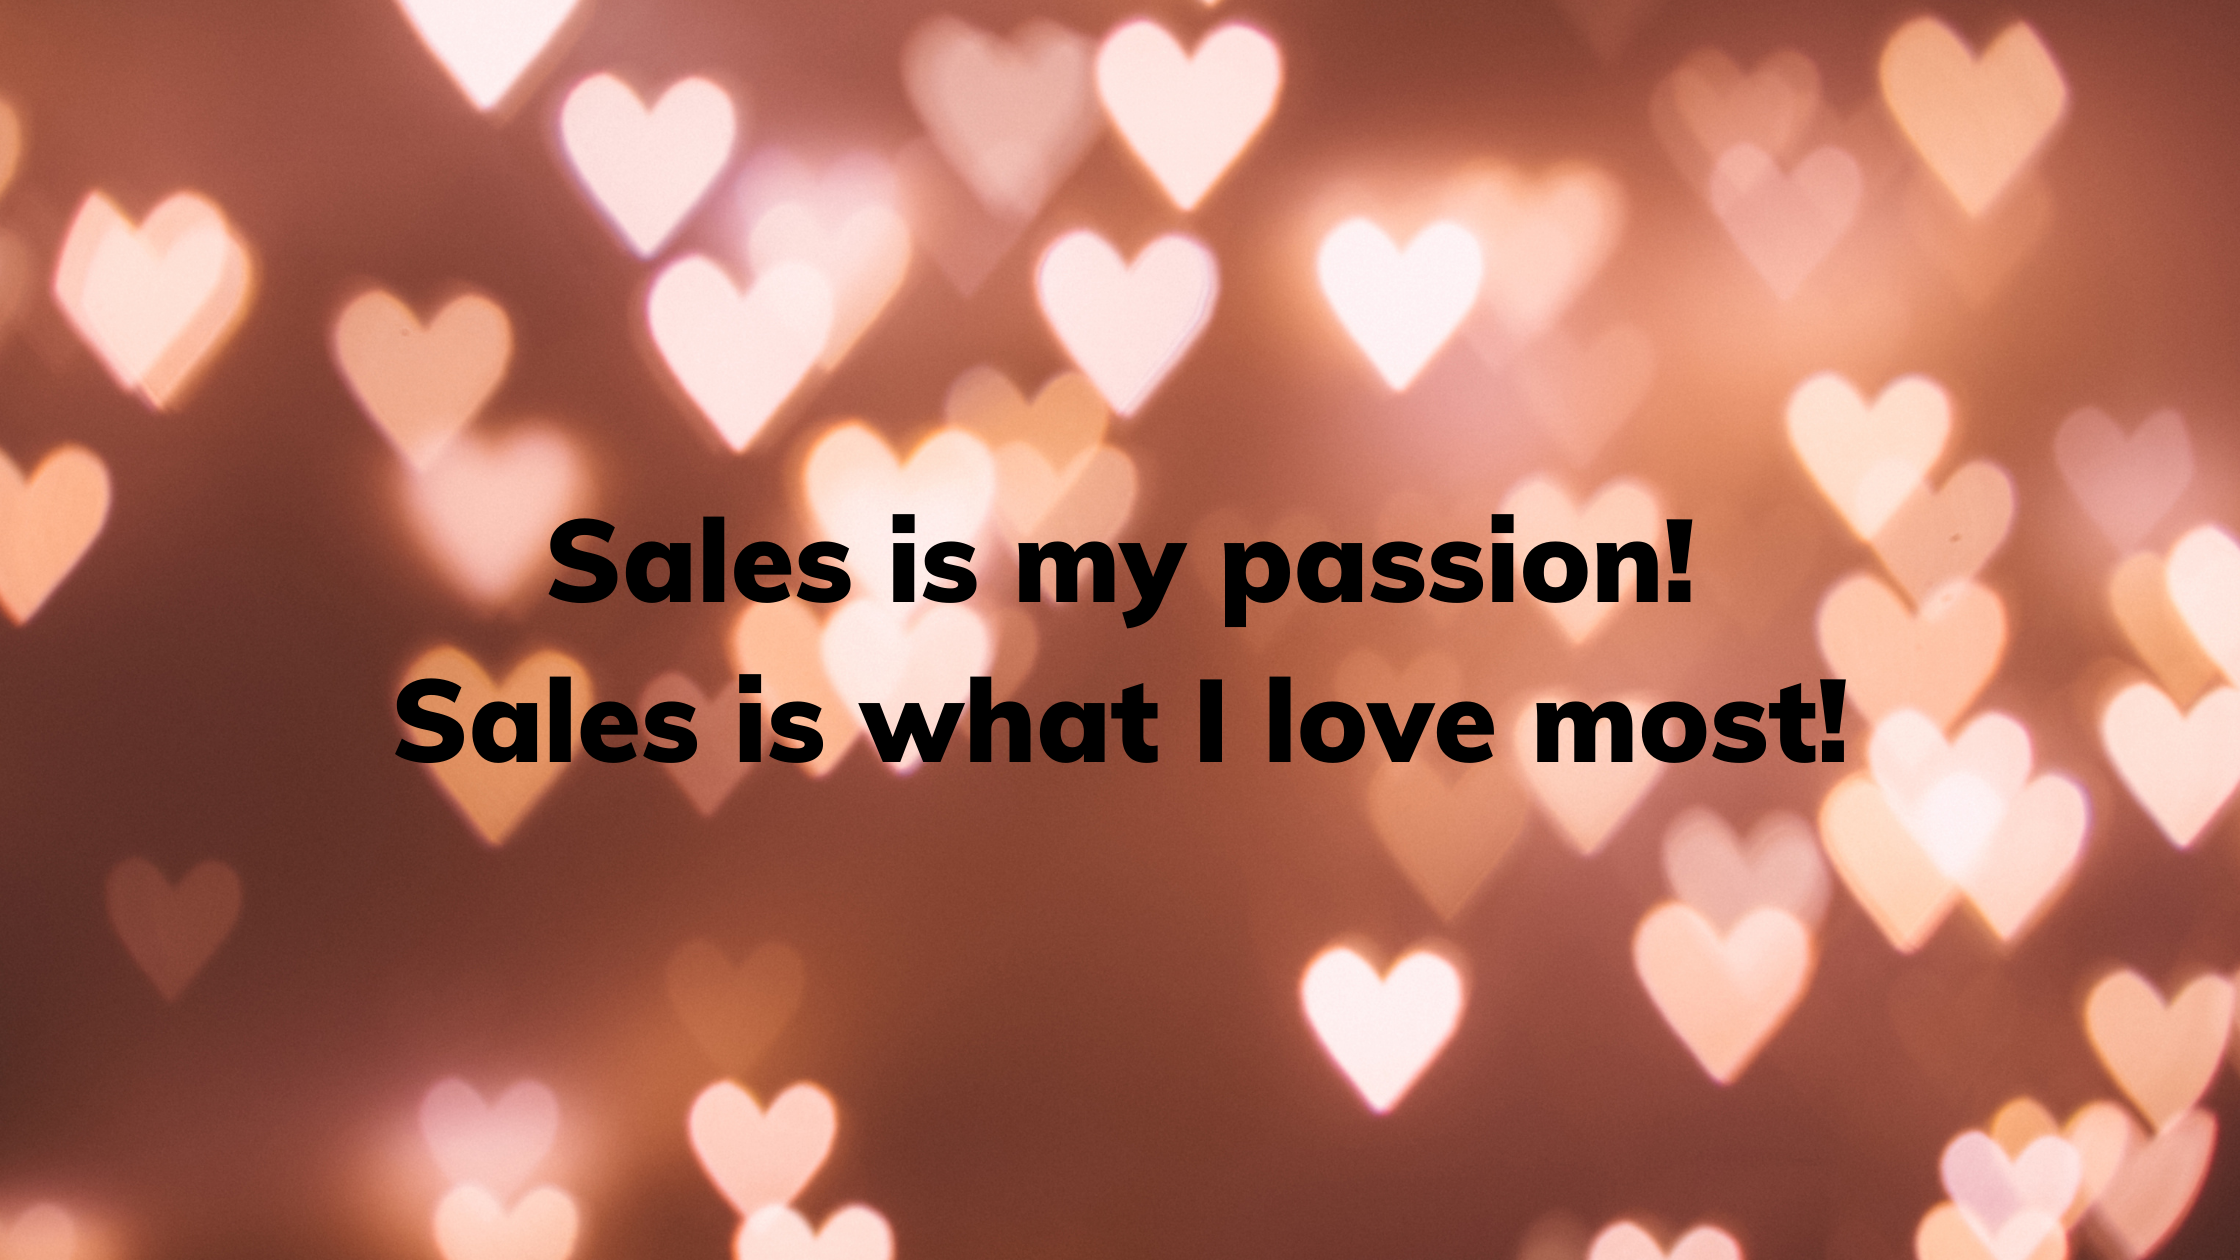 Sales is my passion. Sales is what I love most